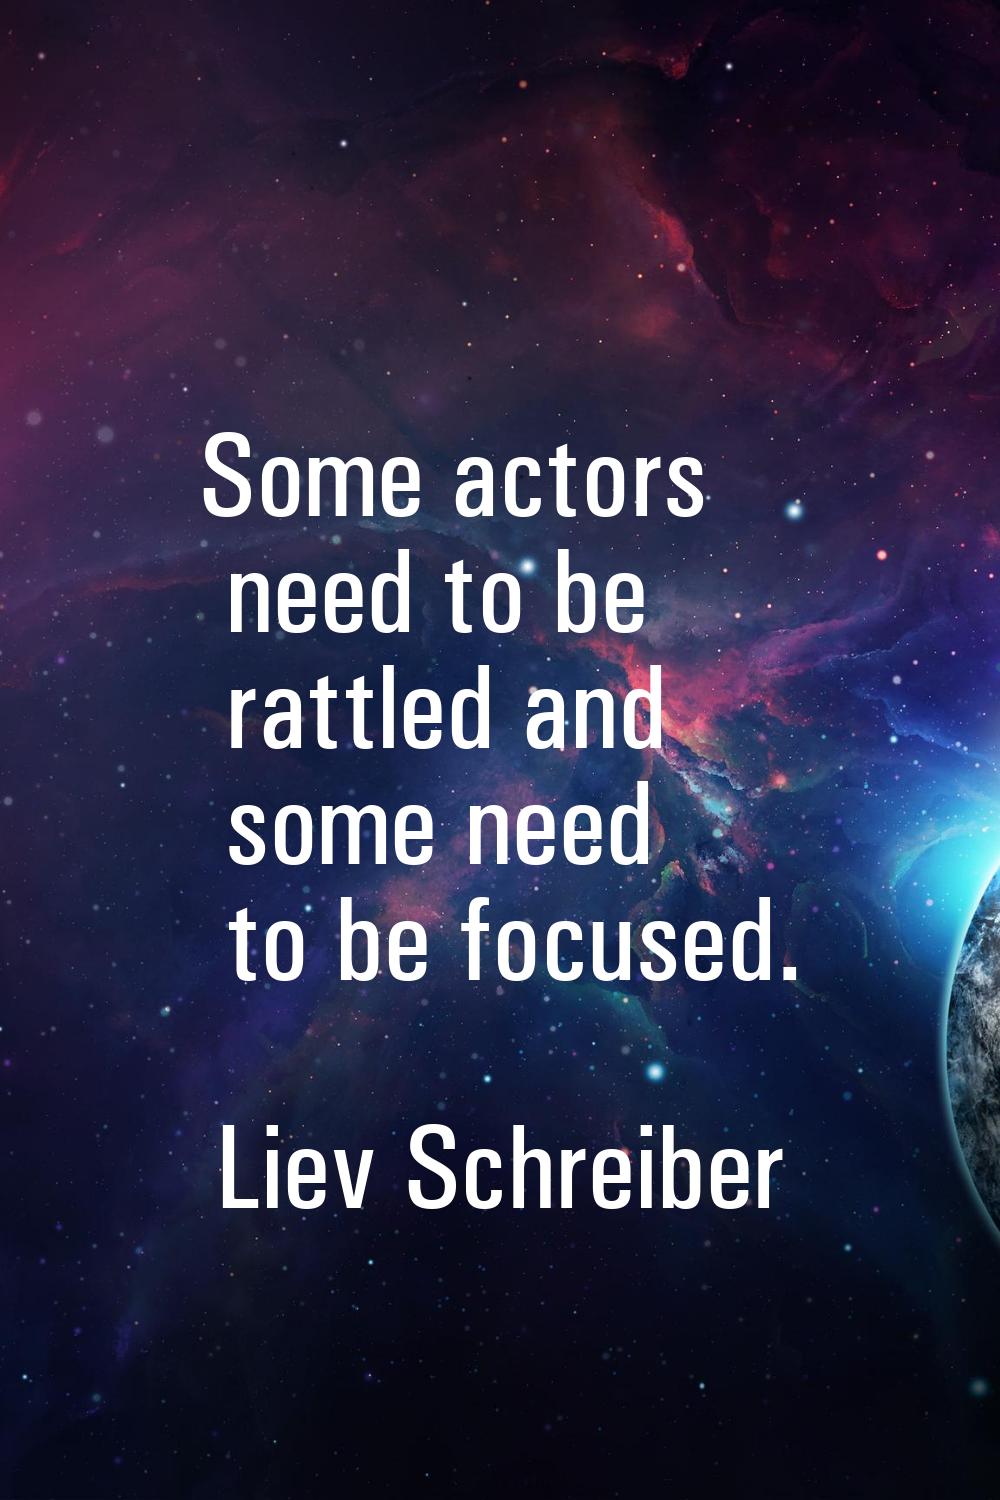 Some actors need to be rattled and some need to be focused.